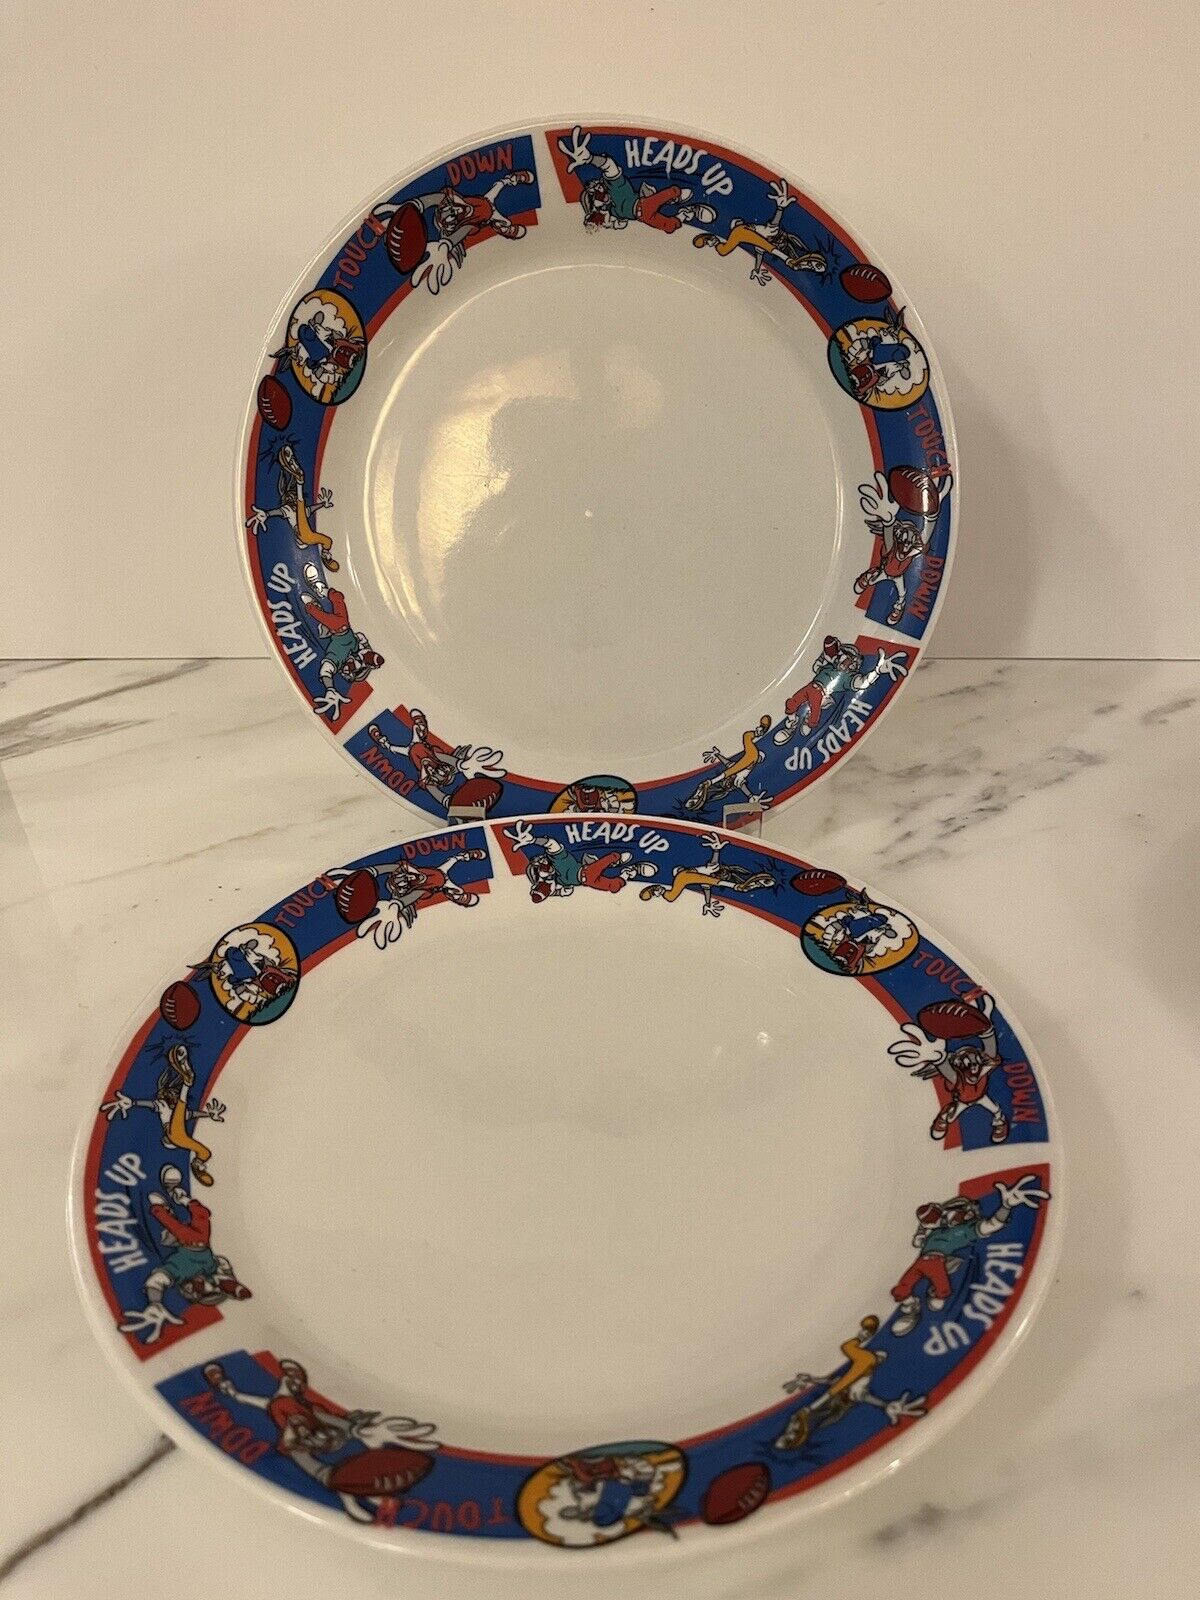 gibson looney tunes football plates dinner heads up touch down set of 2